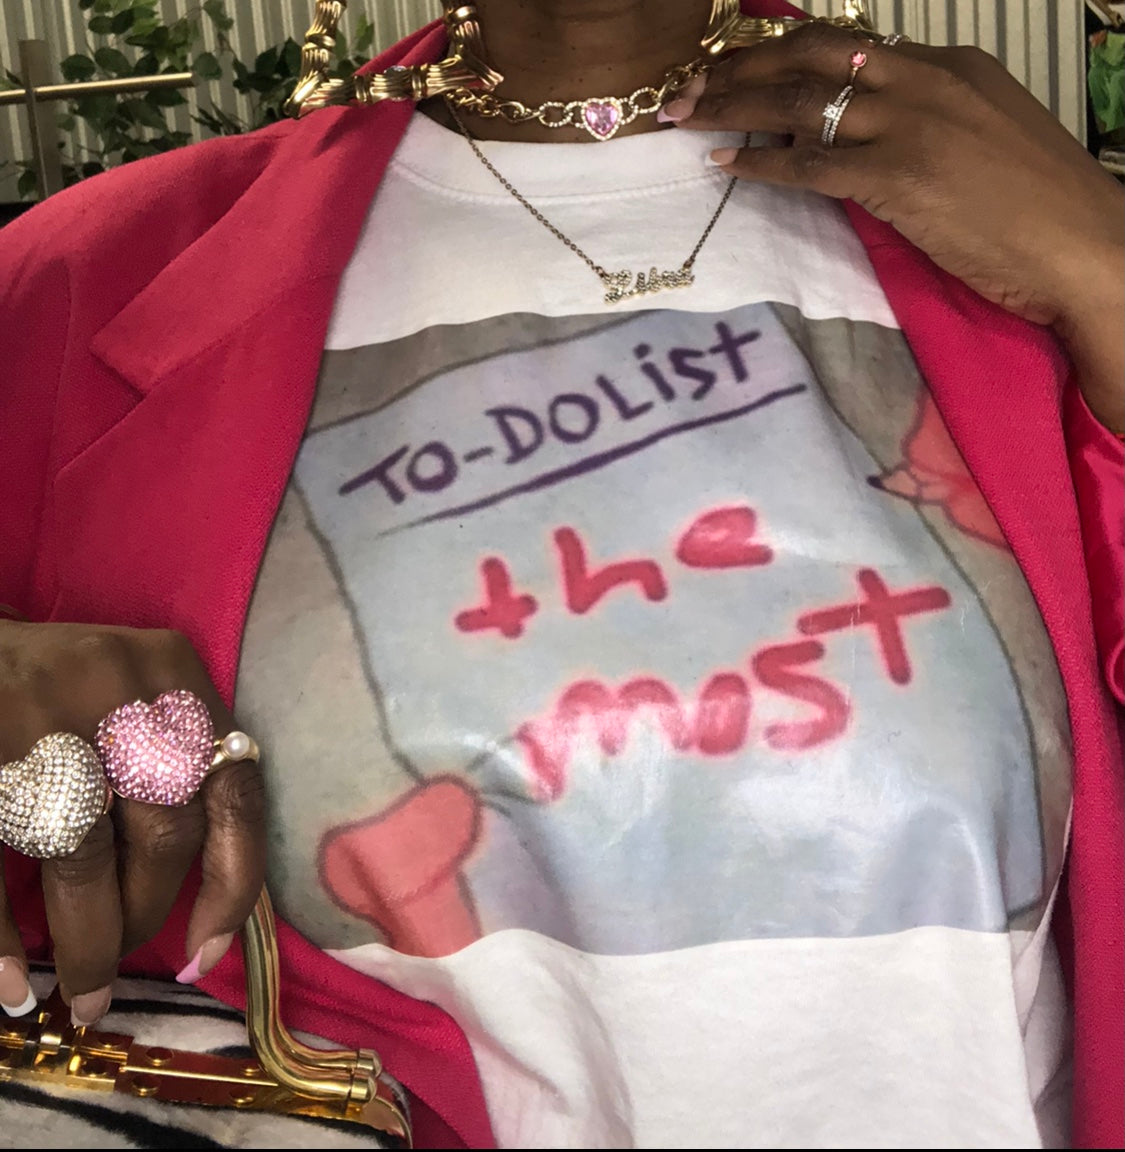 “Do The Most” Tee